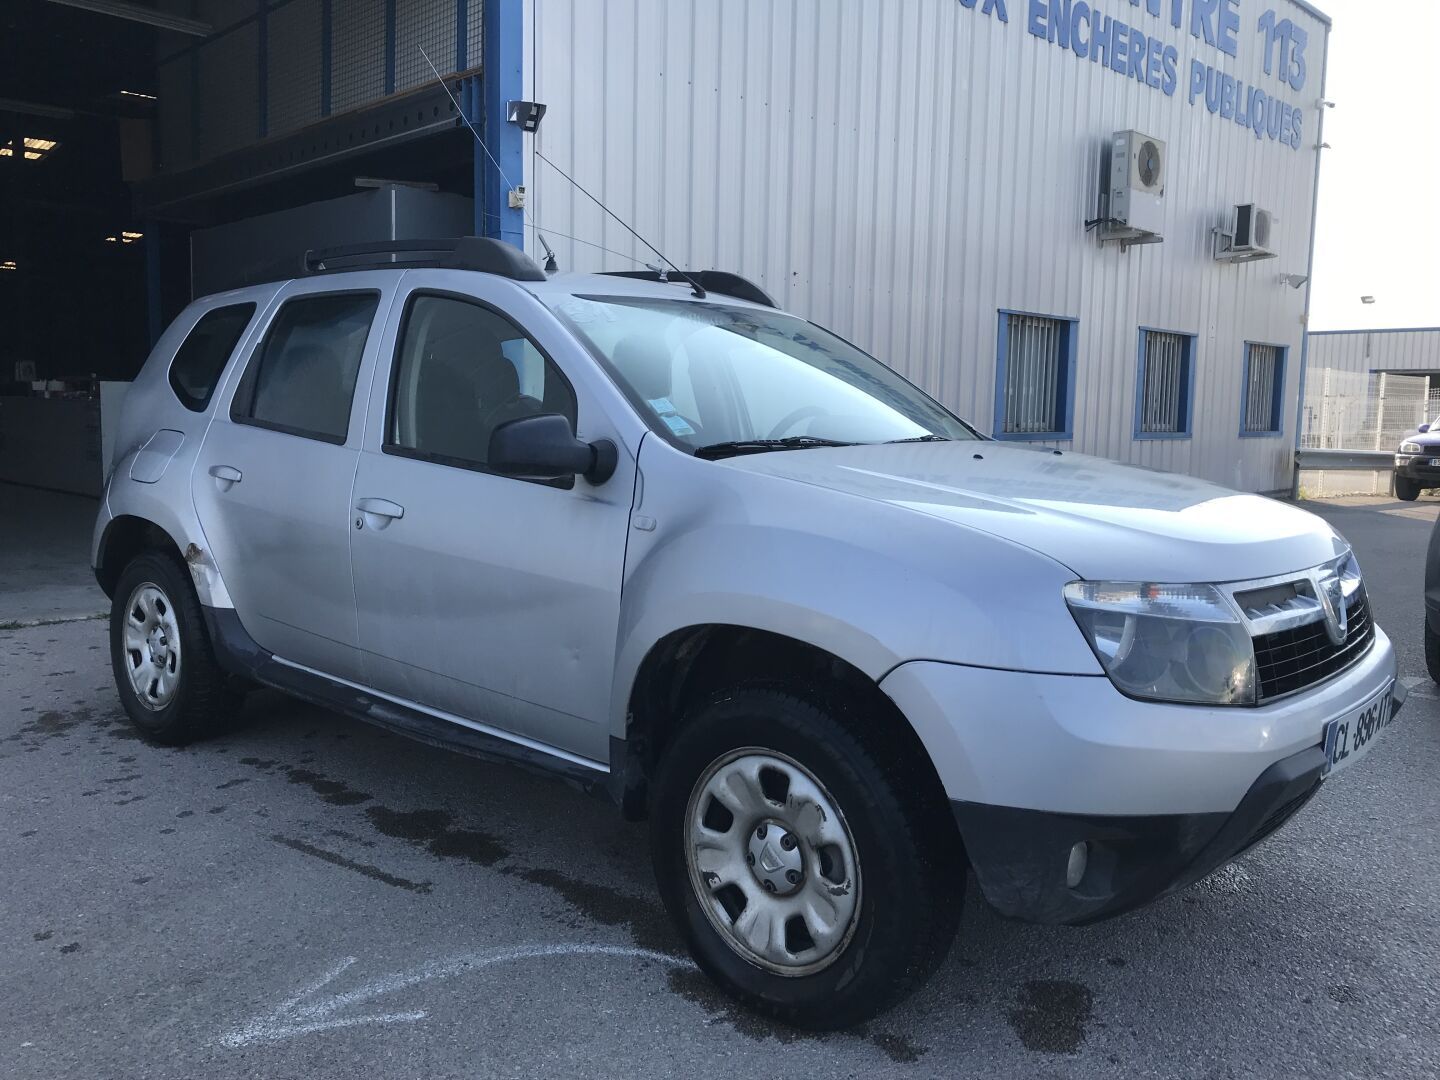 Null DUSTER 4x4 1.5 DCI 110ch
VP DACIA DUSTER 4x4 1.5 DCI 110ch 1.5 DCI
Carrosse&hellip;